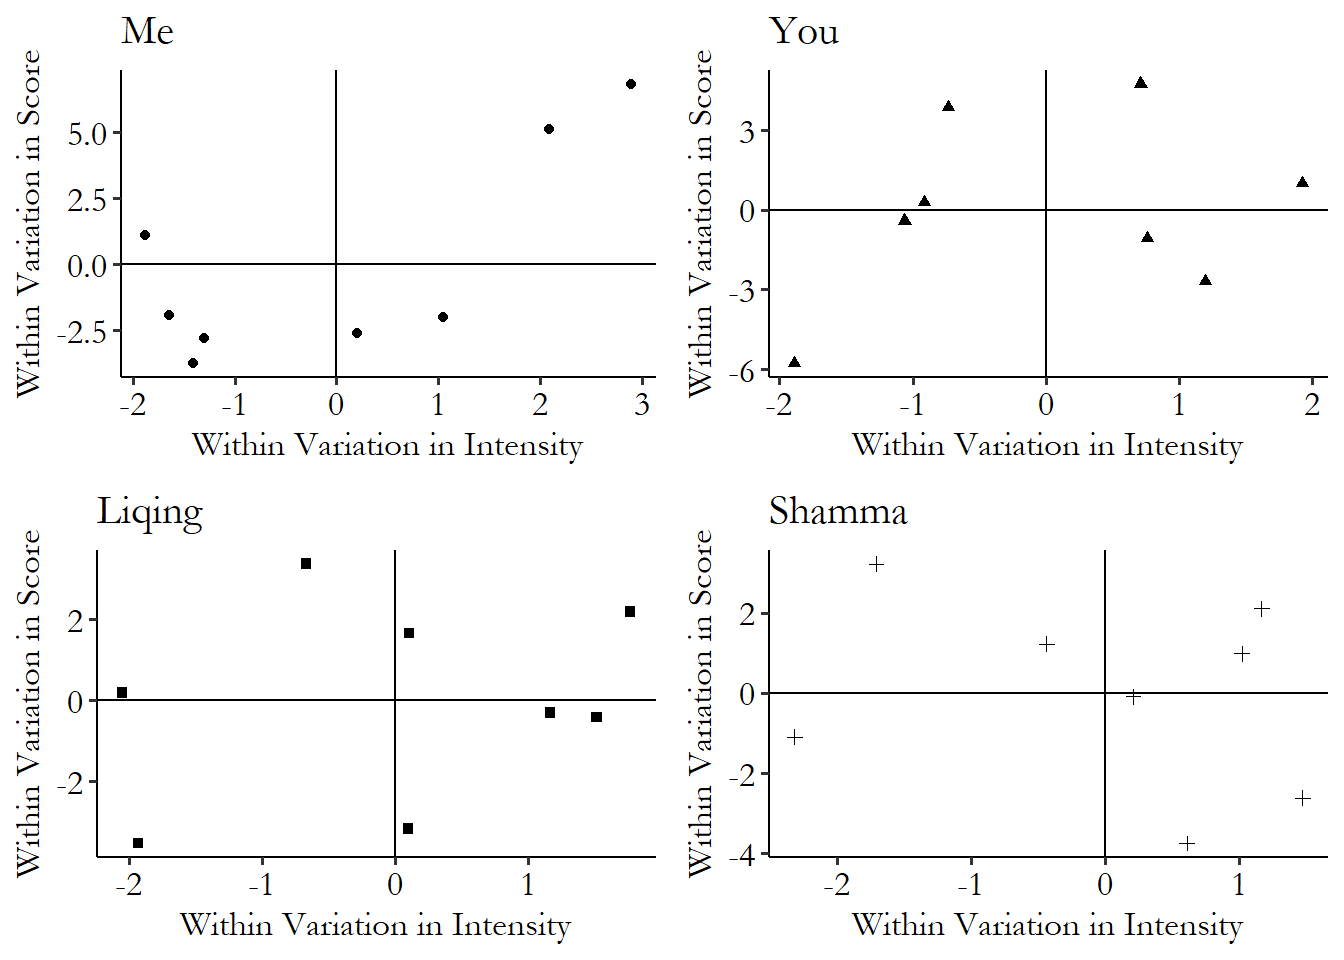 A scatterplot of fictional data showing the chosen intensity of healthy-eating reminders and actual healthy eating for four individuals: You, Me, Liqing, and Shamma, with each individual person separated out and shown relative to their individual means.